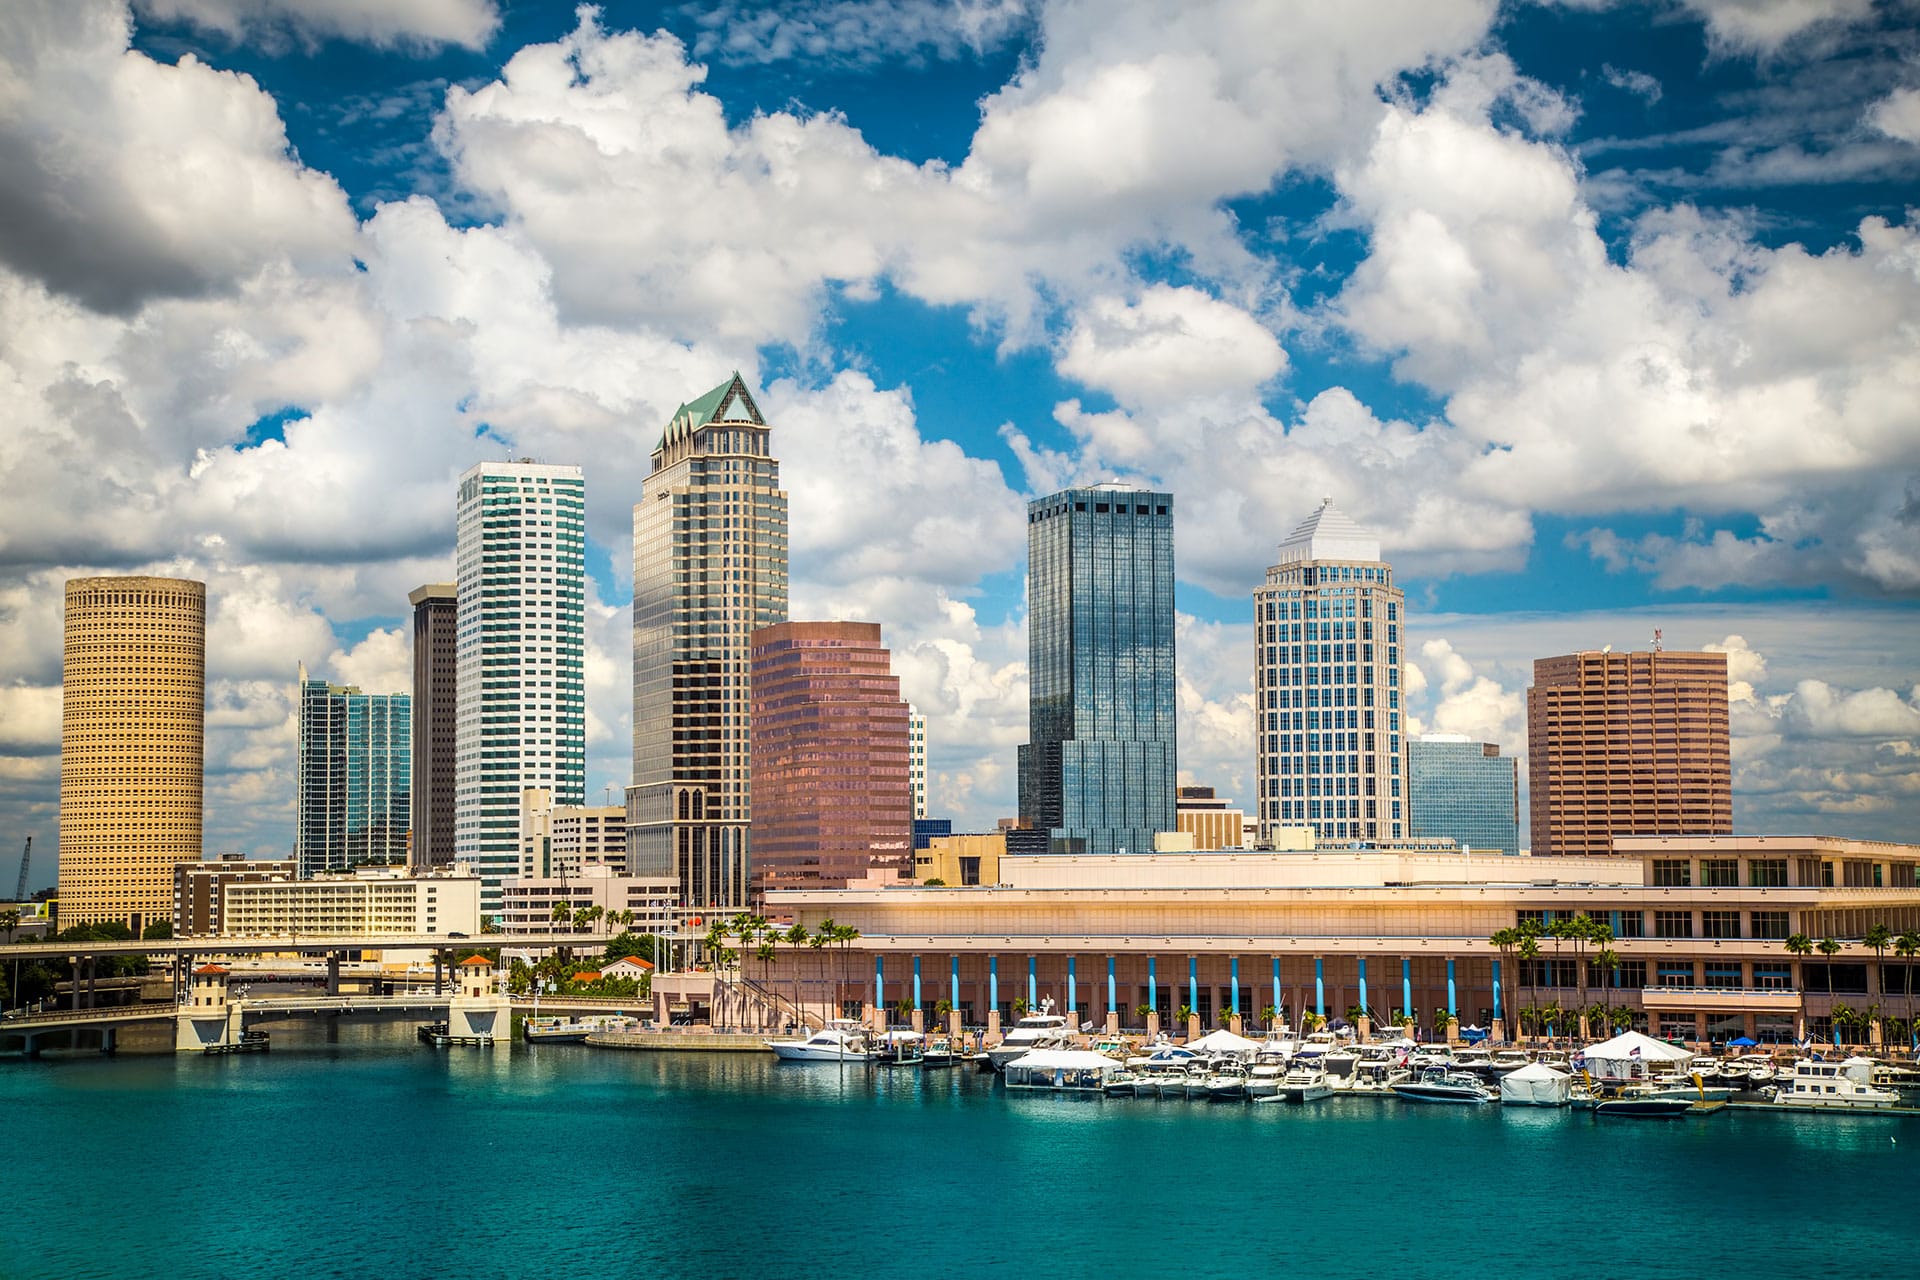 View of the Tampa Florida skyline